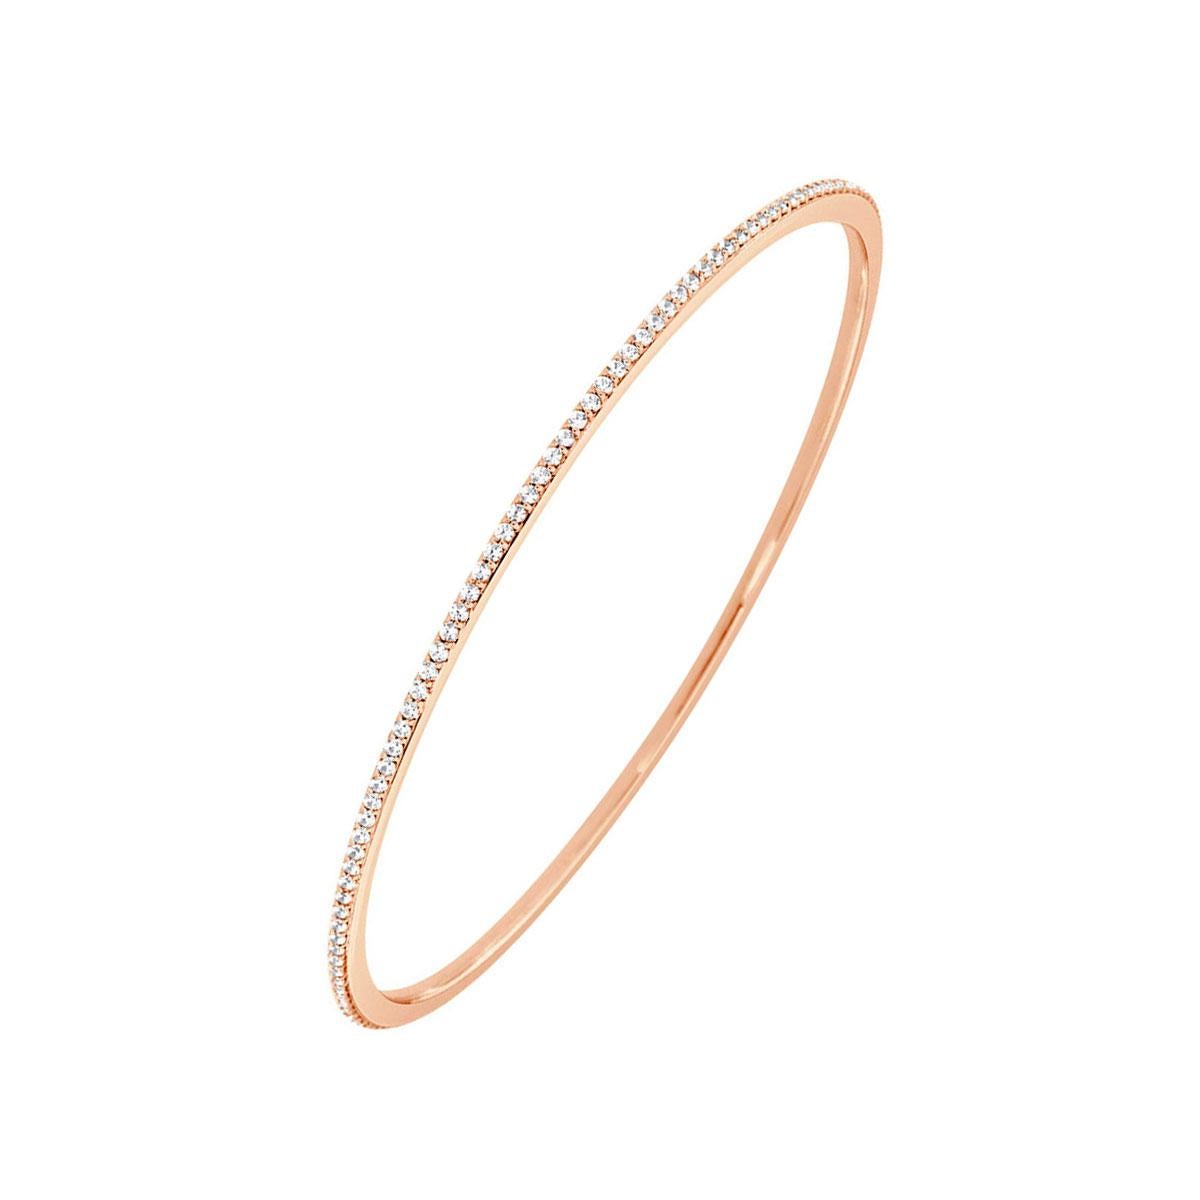 Round Cut 18k Rose Gold Stackable Micro-Prong Diamond Bangle '1 ct. tw' For Sale